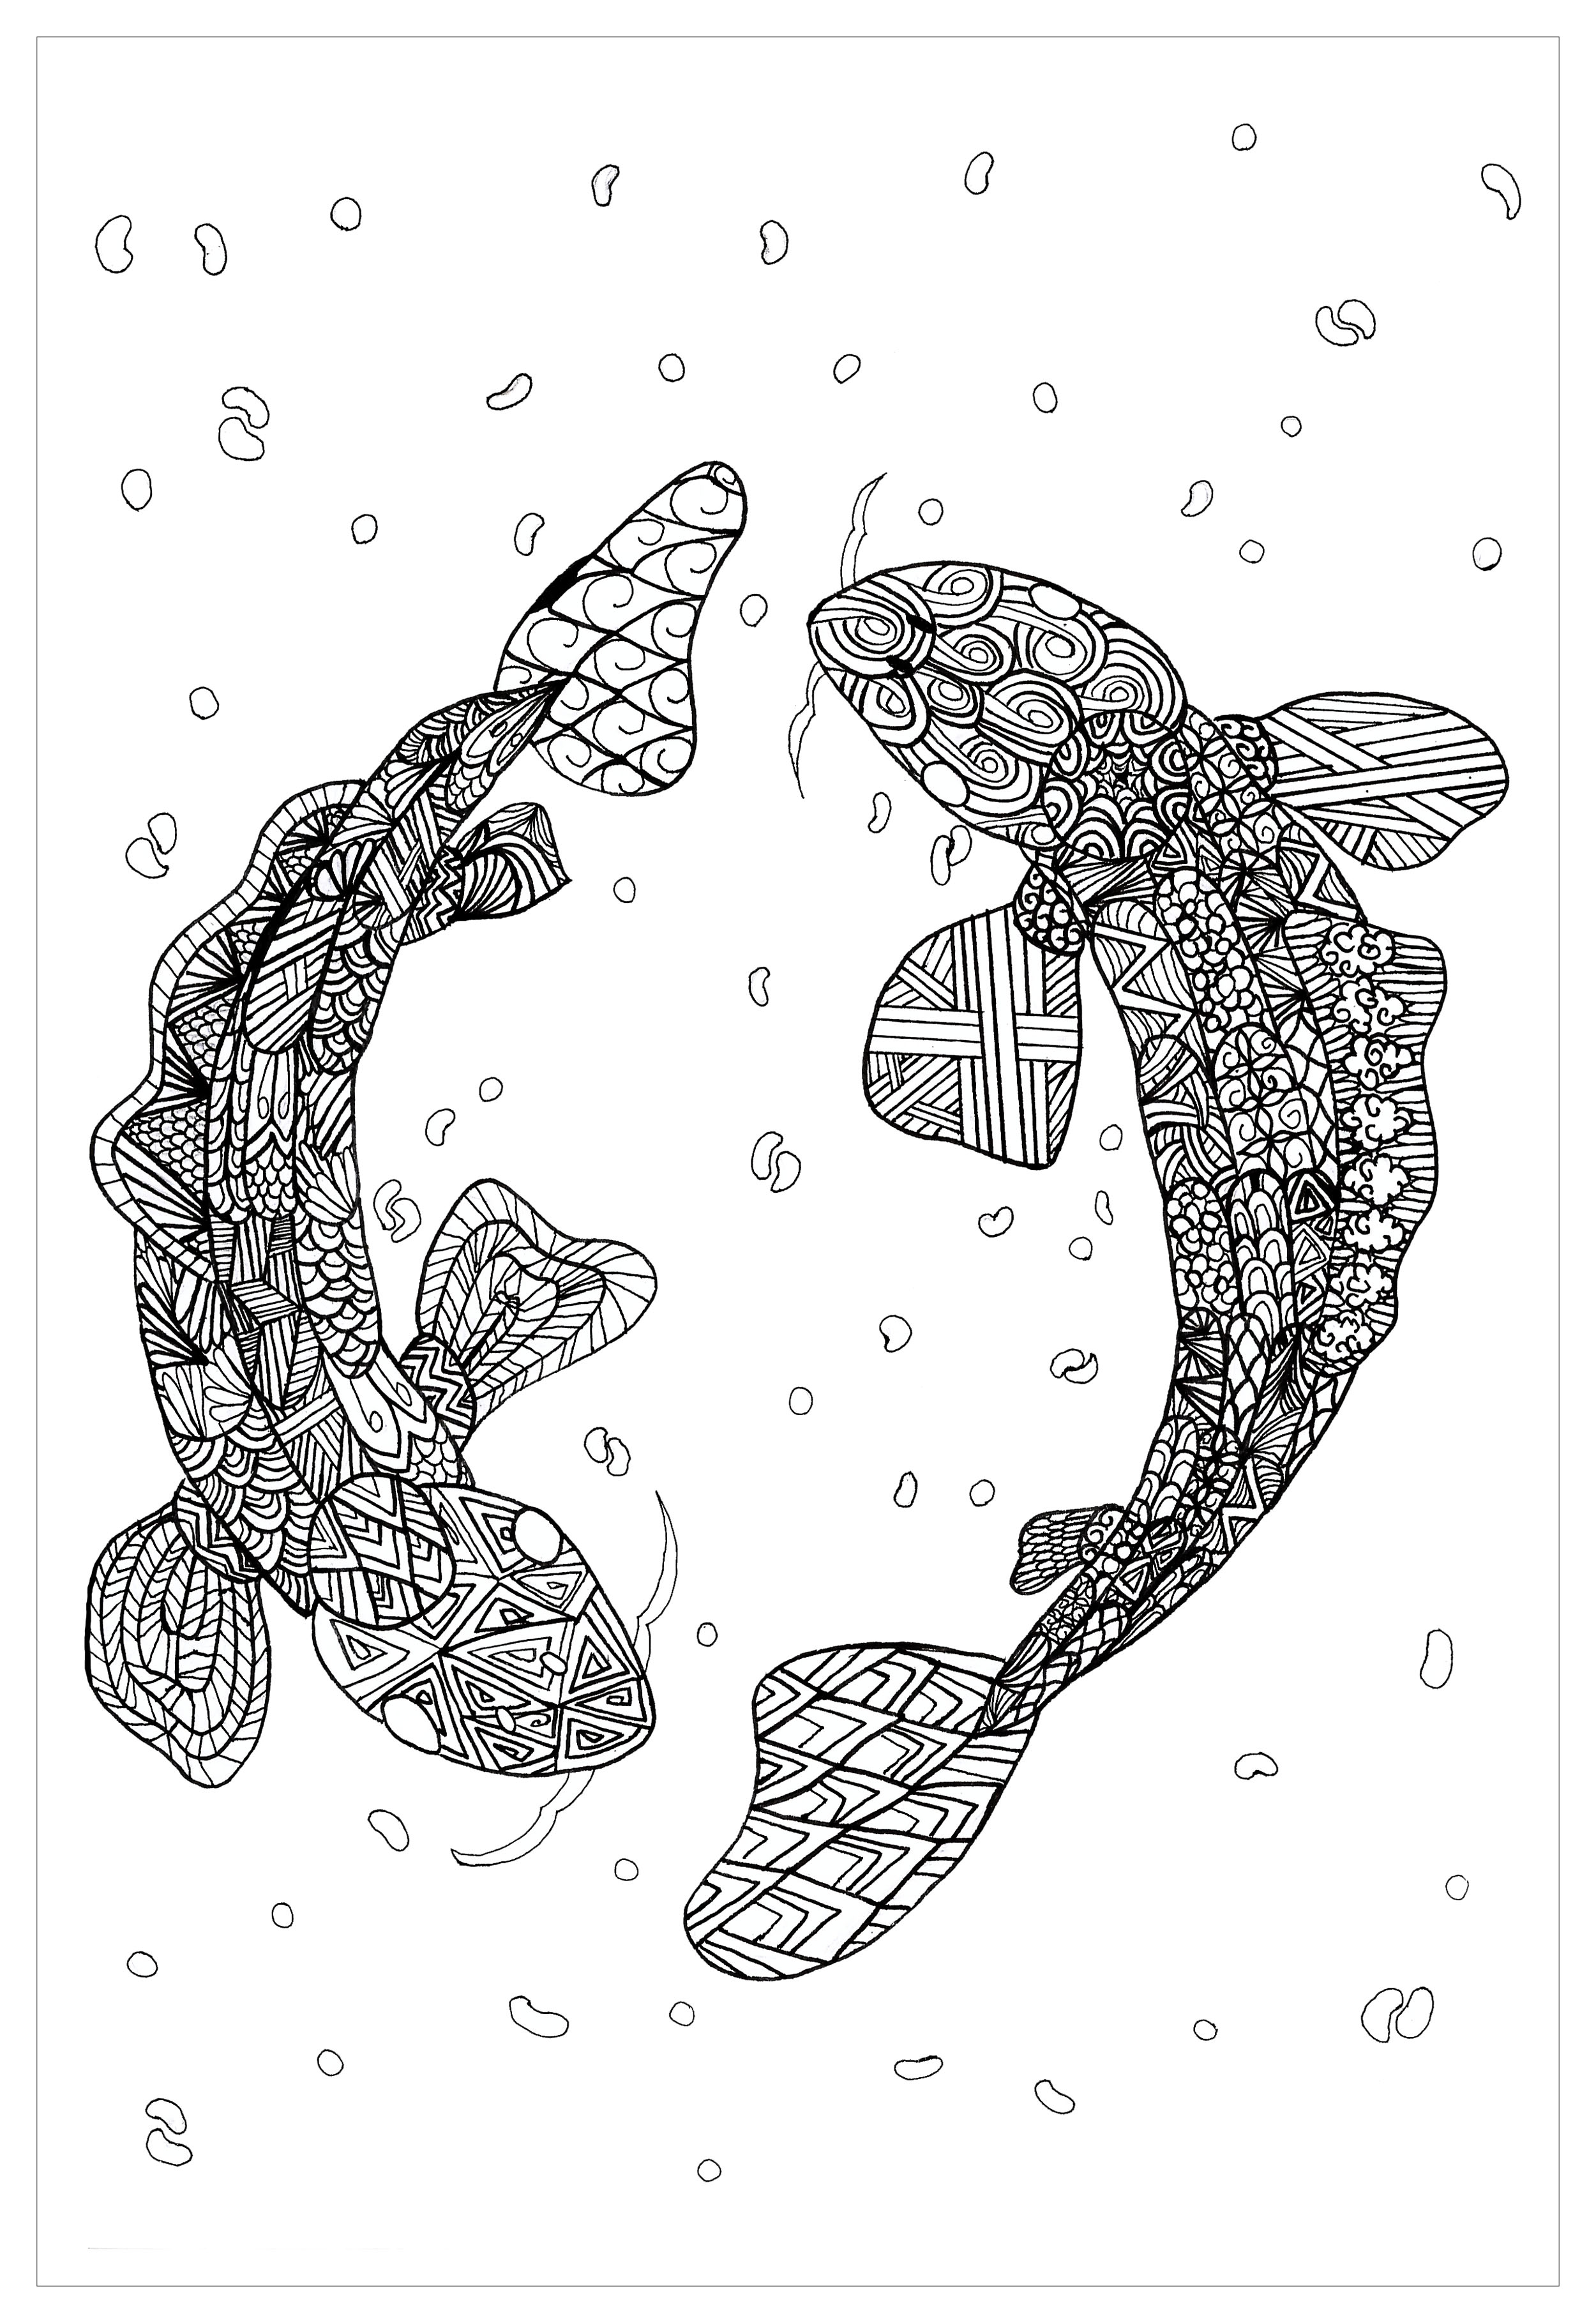 Coloring page of two Koi Carps in Zentangle style. These fishes are highly prized ornamental fish from Asia, Artist : Chloe